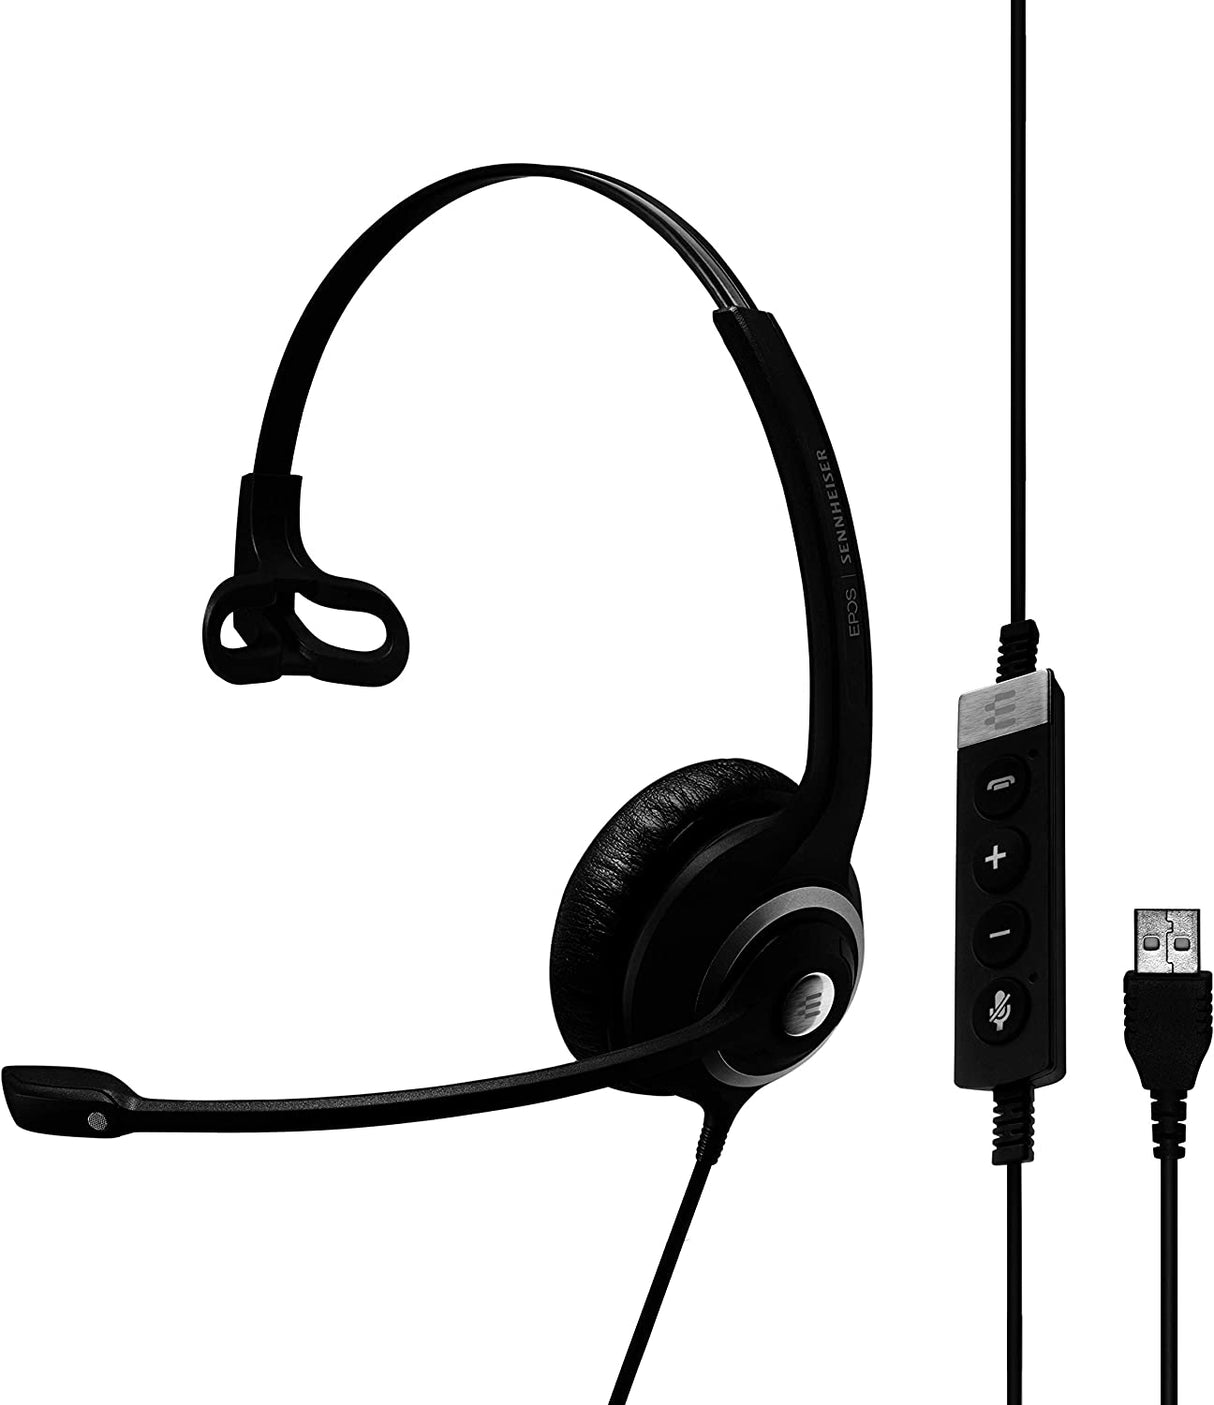 Sennheiser SC 230 USB MS II (506482) - Single-Sided Business Headset | For Skype for Business, Softphone, and PC | with HD Sound, Noise-Cancelling Microphone (Black)